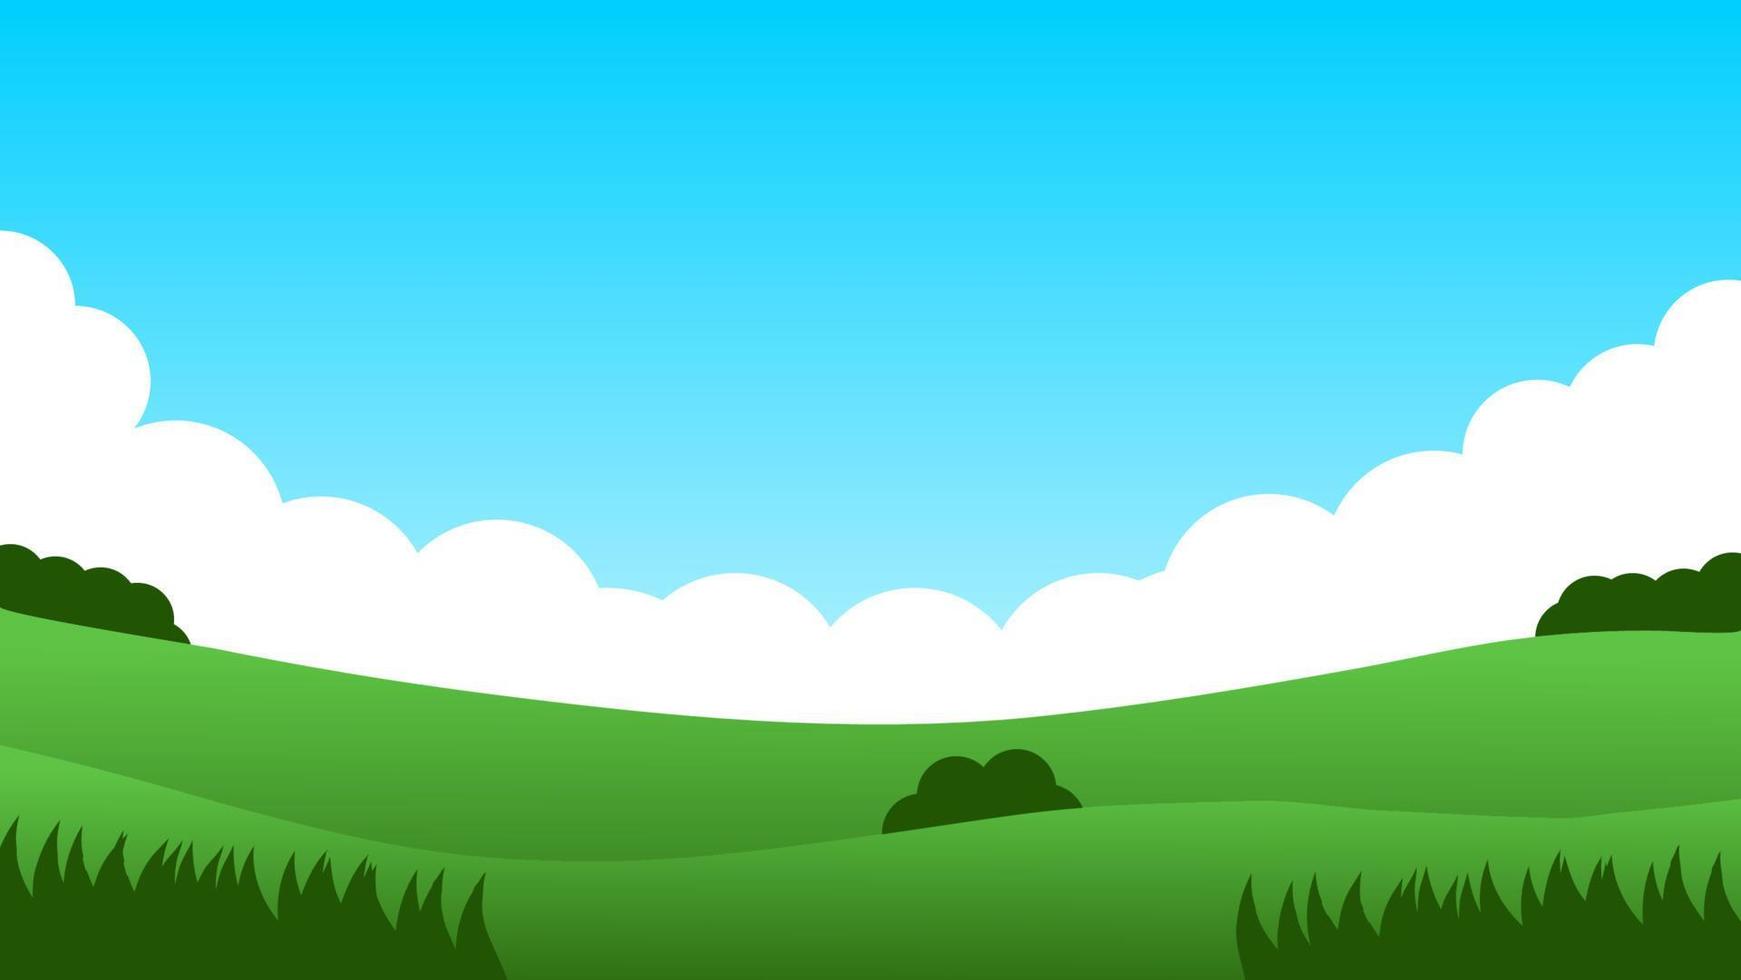 landscape cartoon scene. green field with bush on hill and summer clear blue sky with white cloud vector